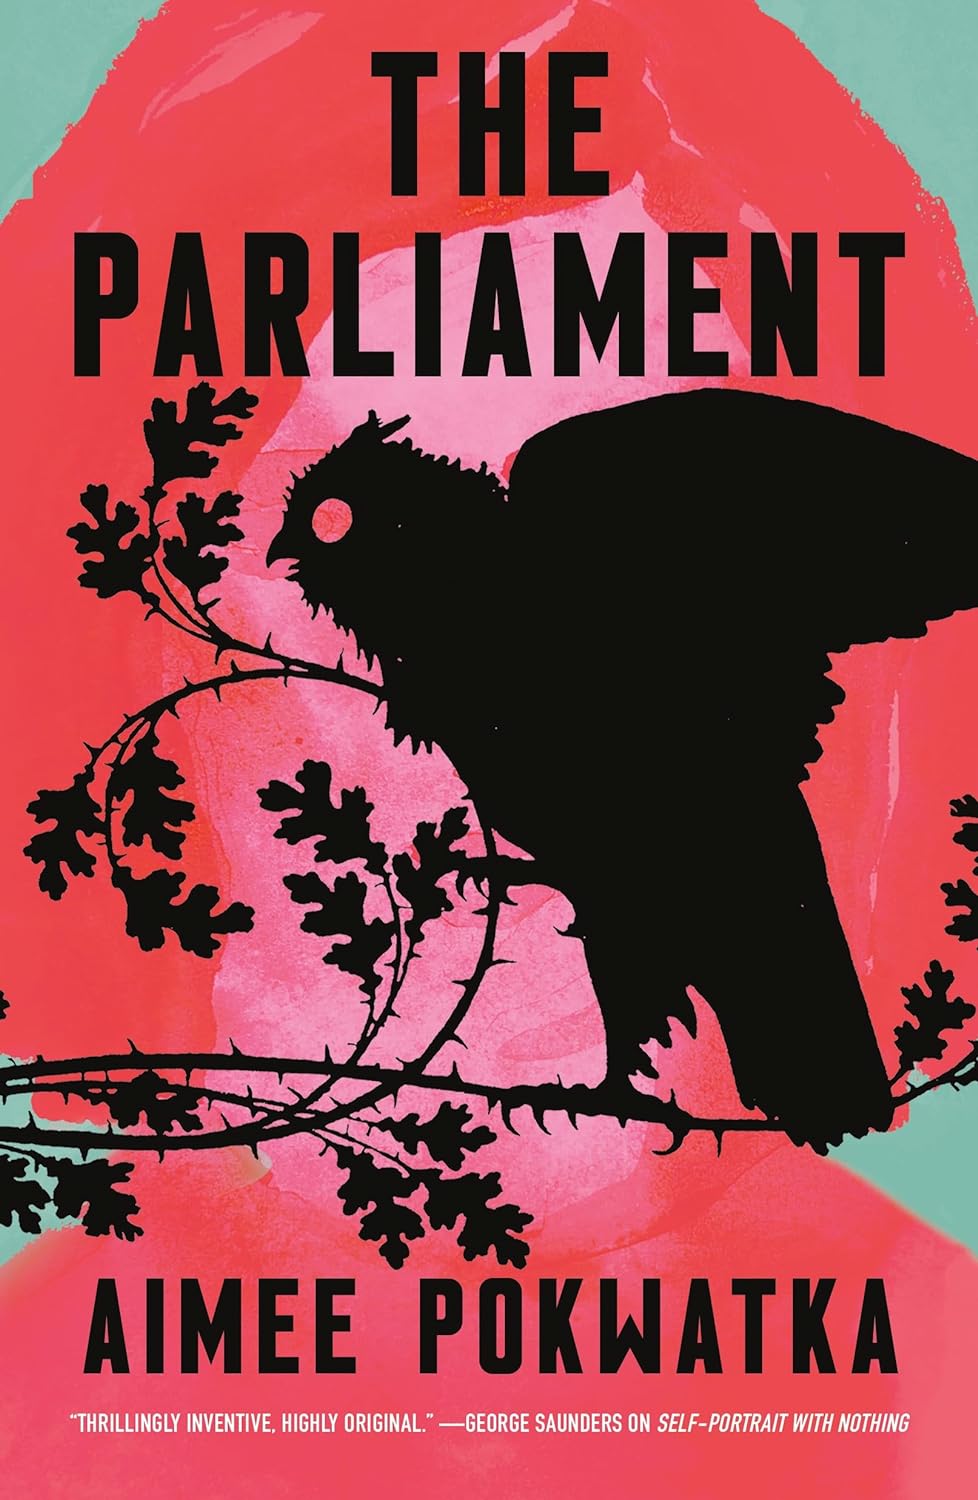 Image for "The Parliament"